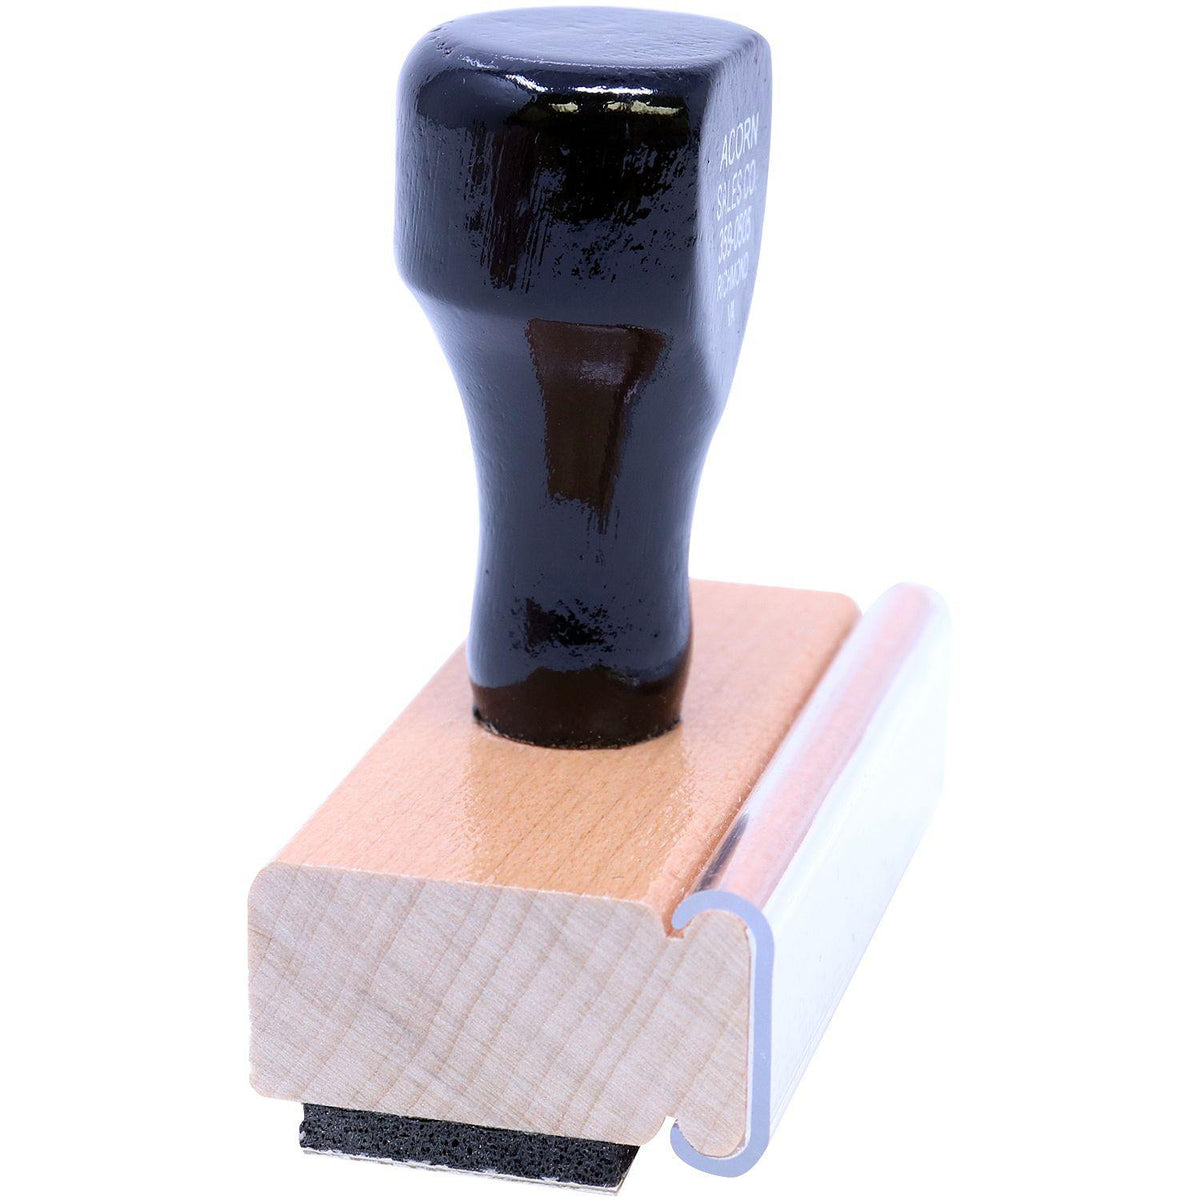 Side View of Large Bold FYI Rubber Stamp at an Angle